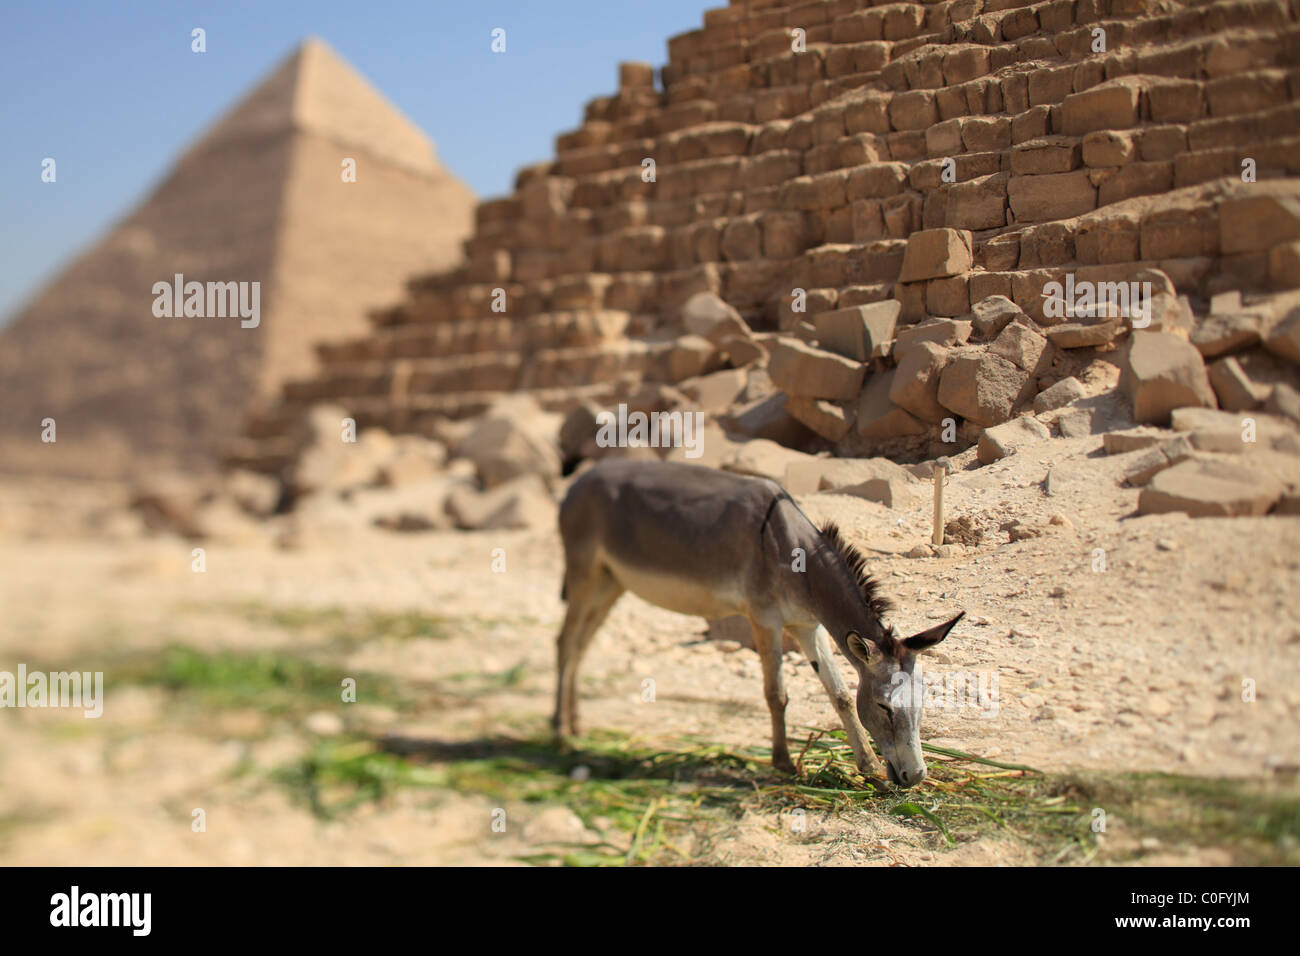 Mule feeding at the pyramids in Giza, Egypt - selective focus. Stock Photo